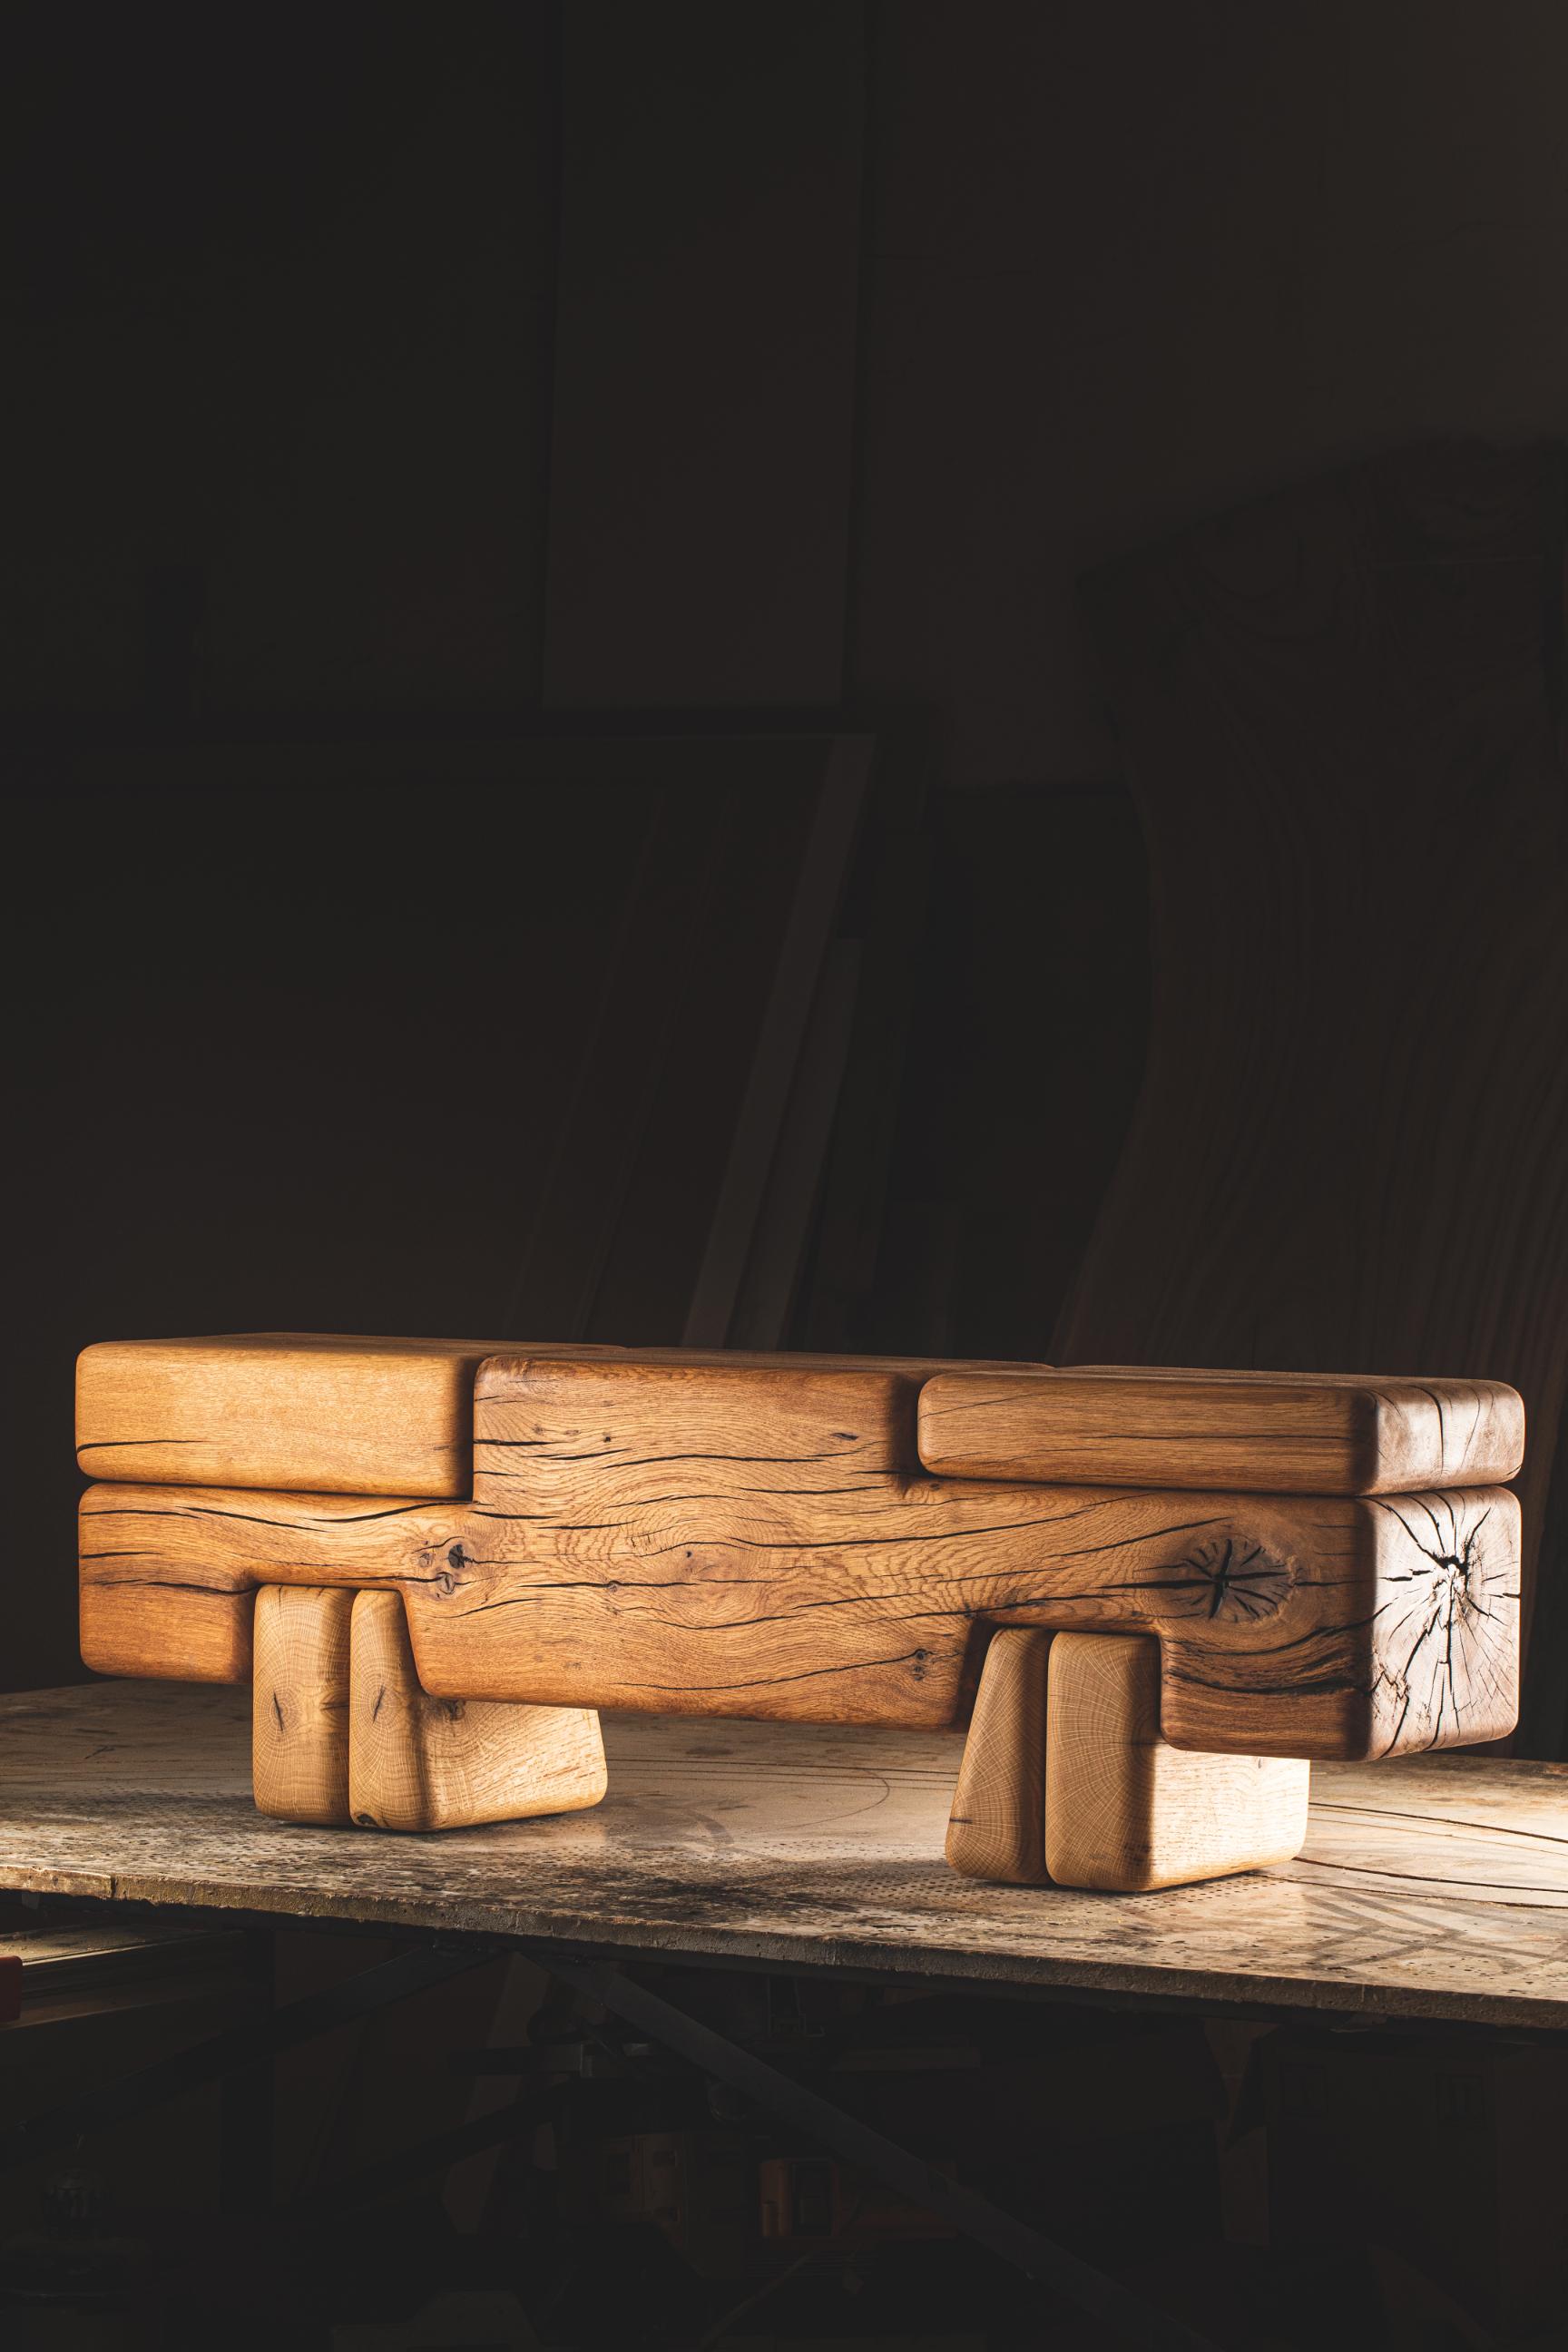 Offcut Bench by Contemporary Ecowood
Dimensions: W 120 x D 28 x H 39 cm.
Materials: Kiln Dried Turkish Oak.

Contemporary Ecowood’s story began in a craft workshop in 2009. Our wood passion made us focus on fallen trees in the environment and